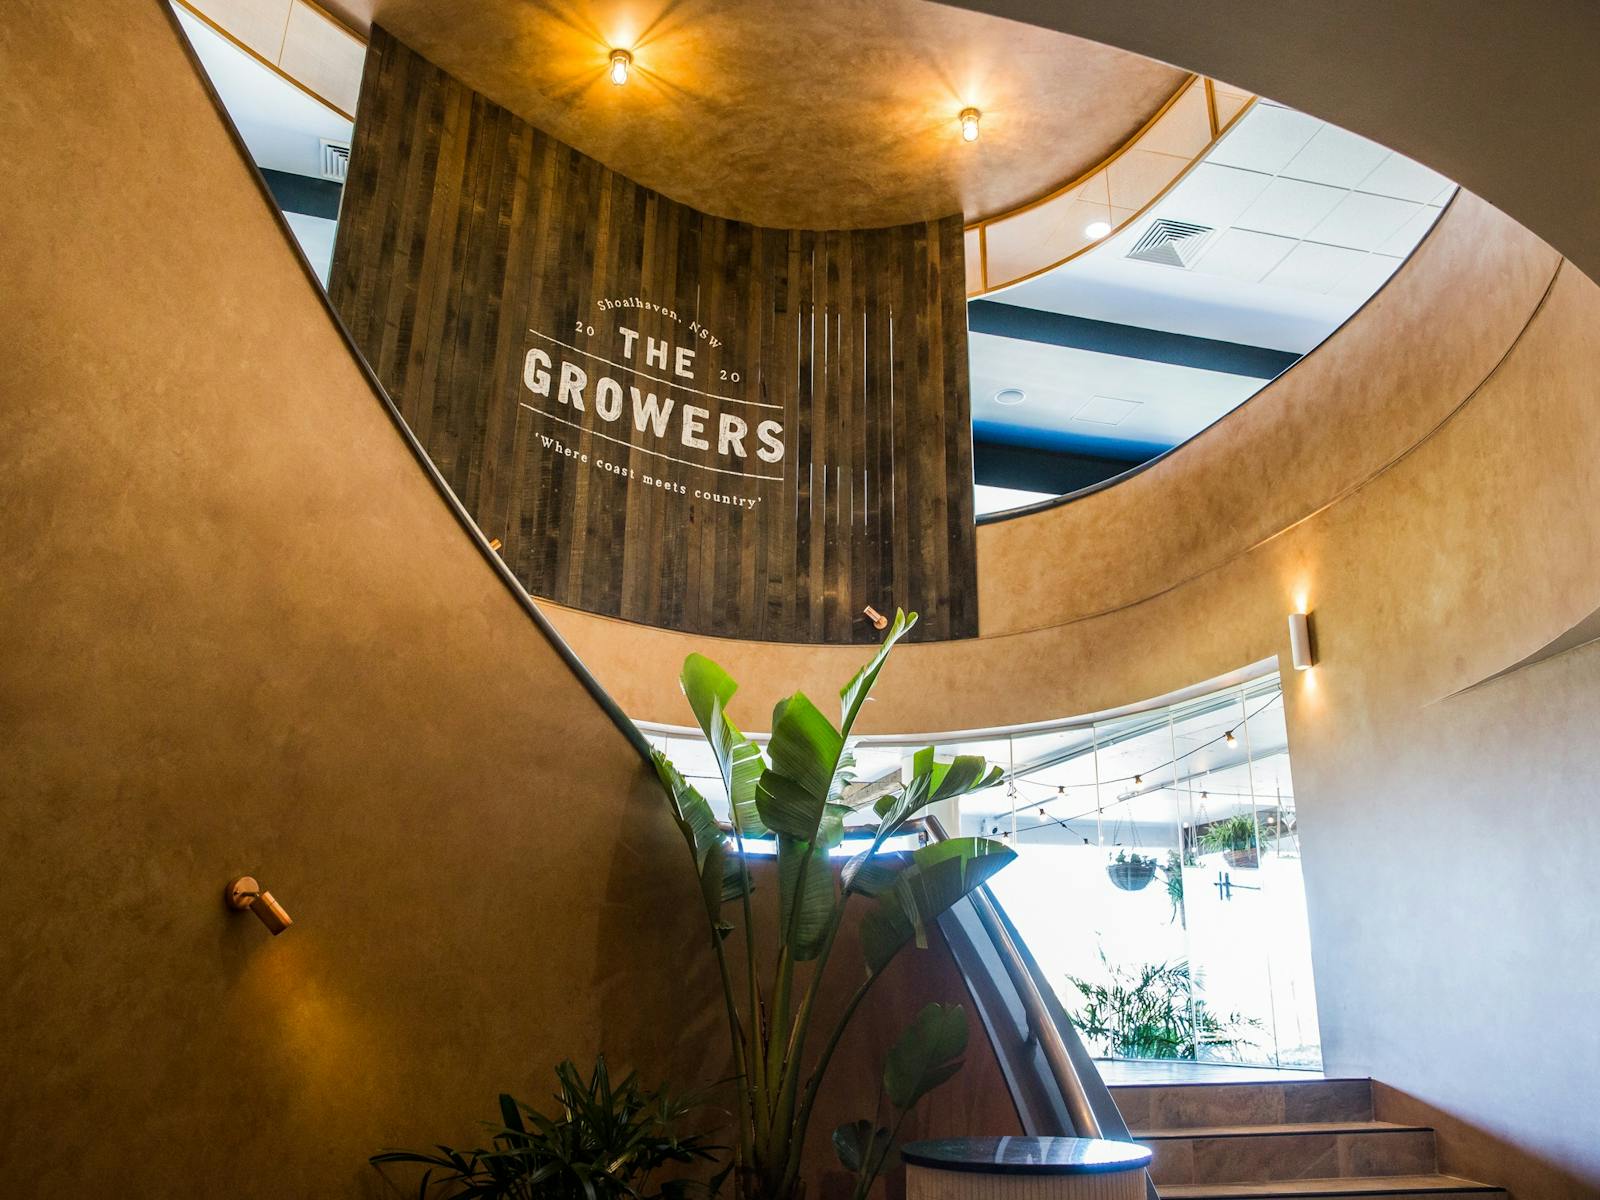 The Growers entrance